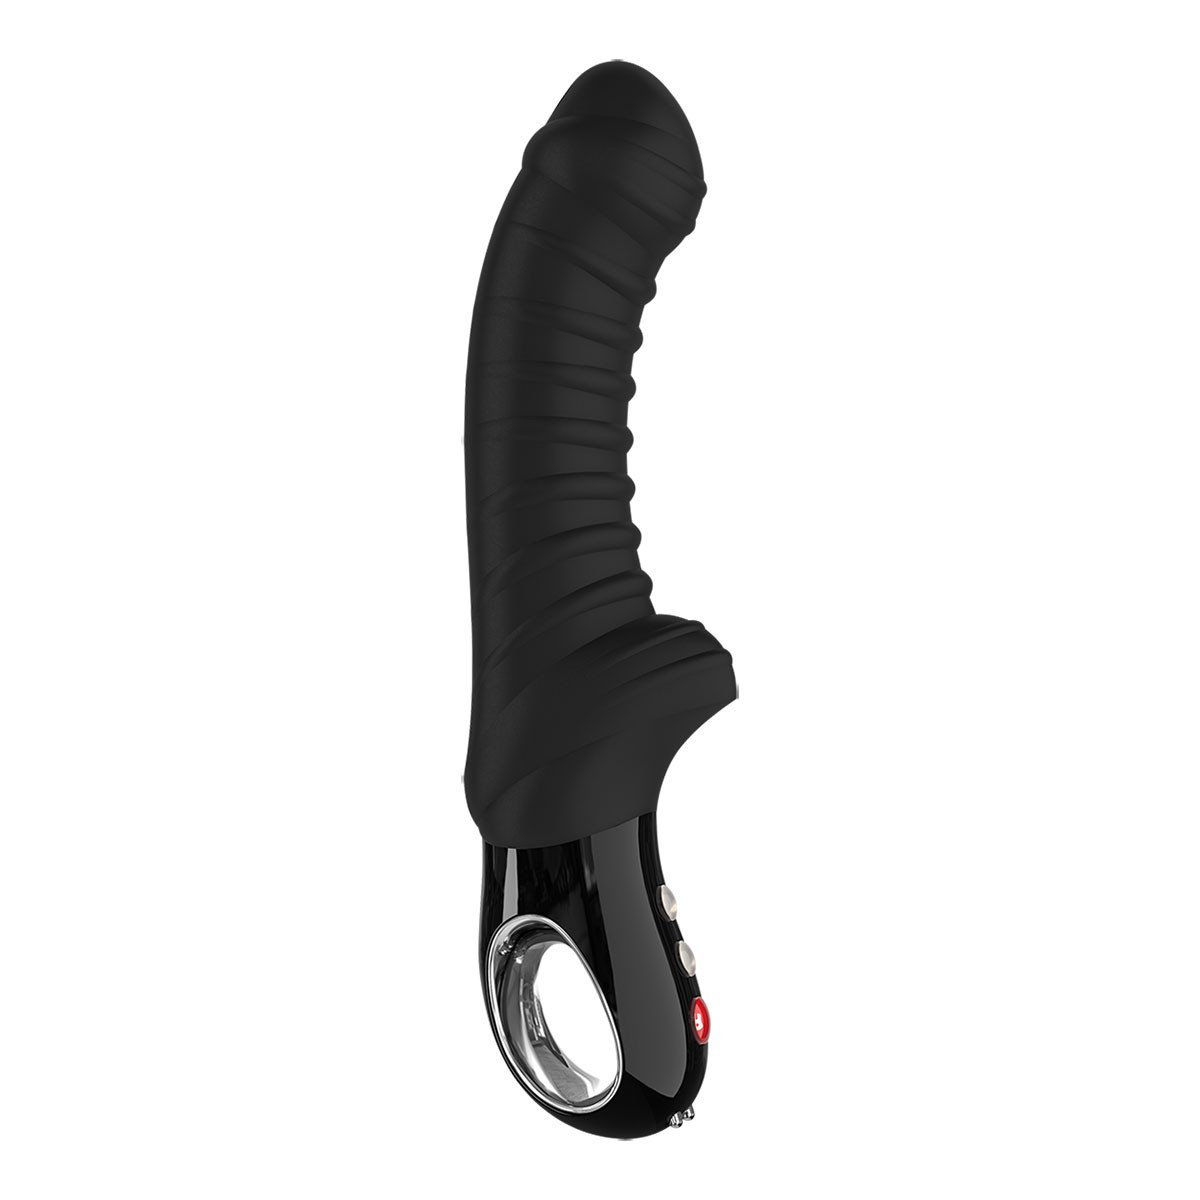 Fun Factory Tiger G5 Hand-Held Vibrating Dildo Beyond Delights photo